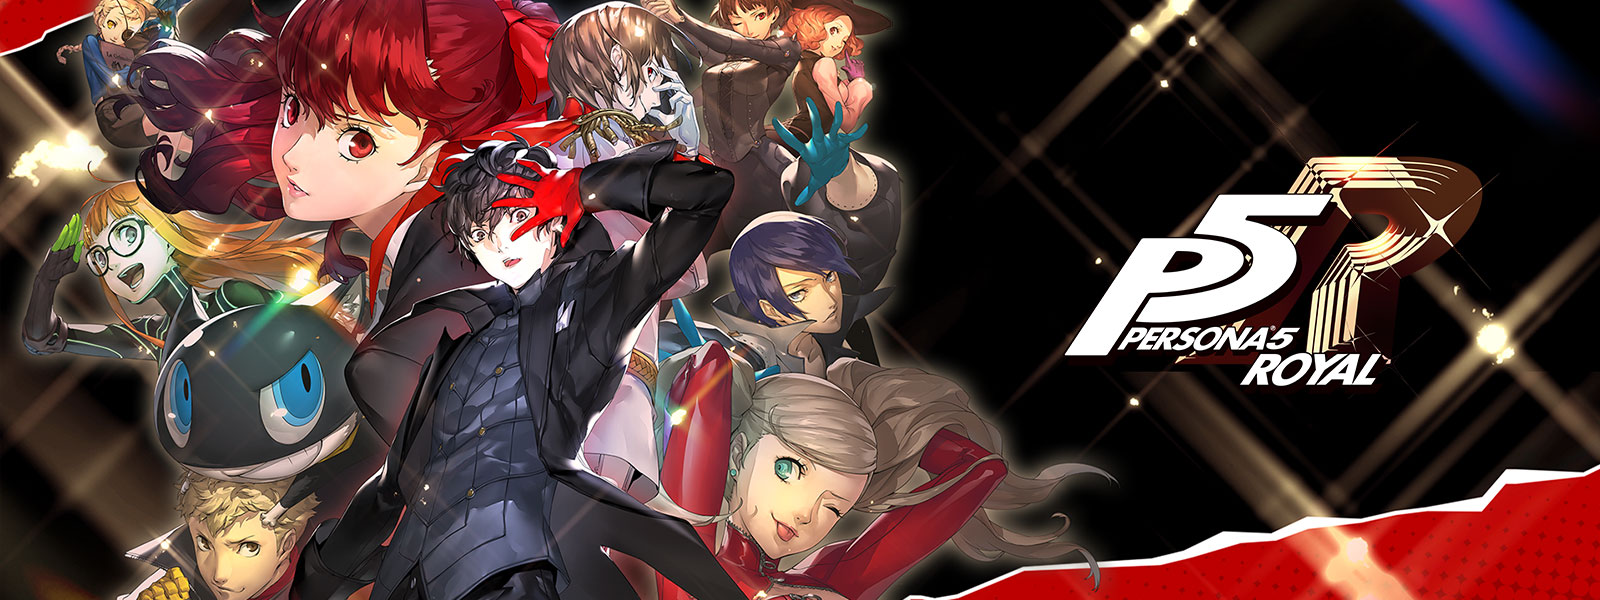 P5R, Persona 5 Royal, Joker poses with other persona characters posing behind him.